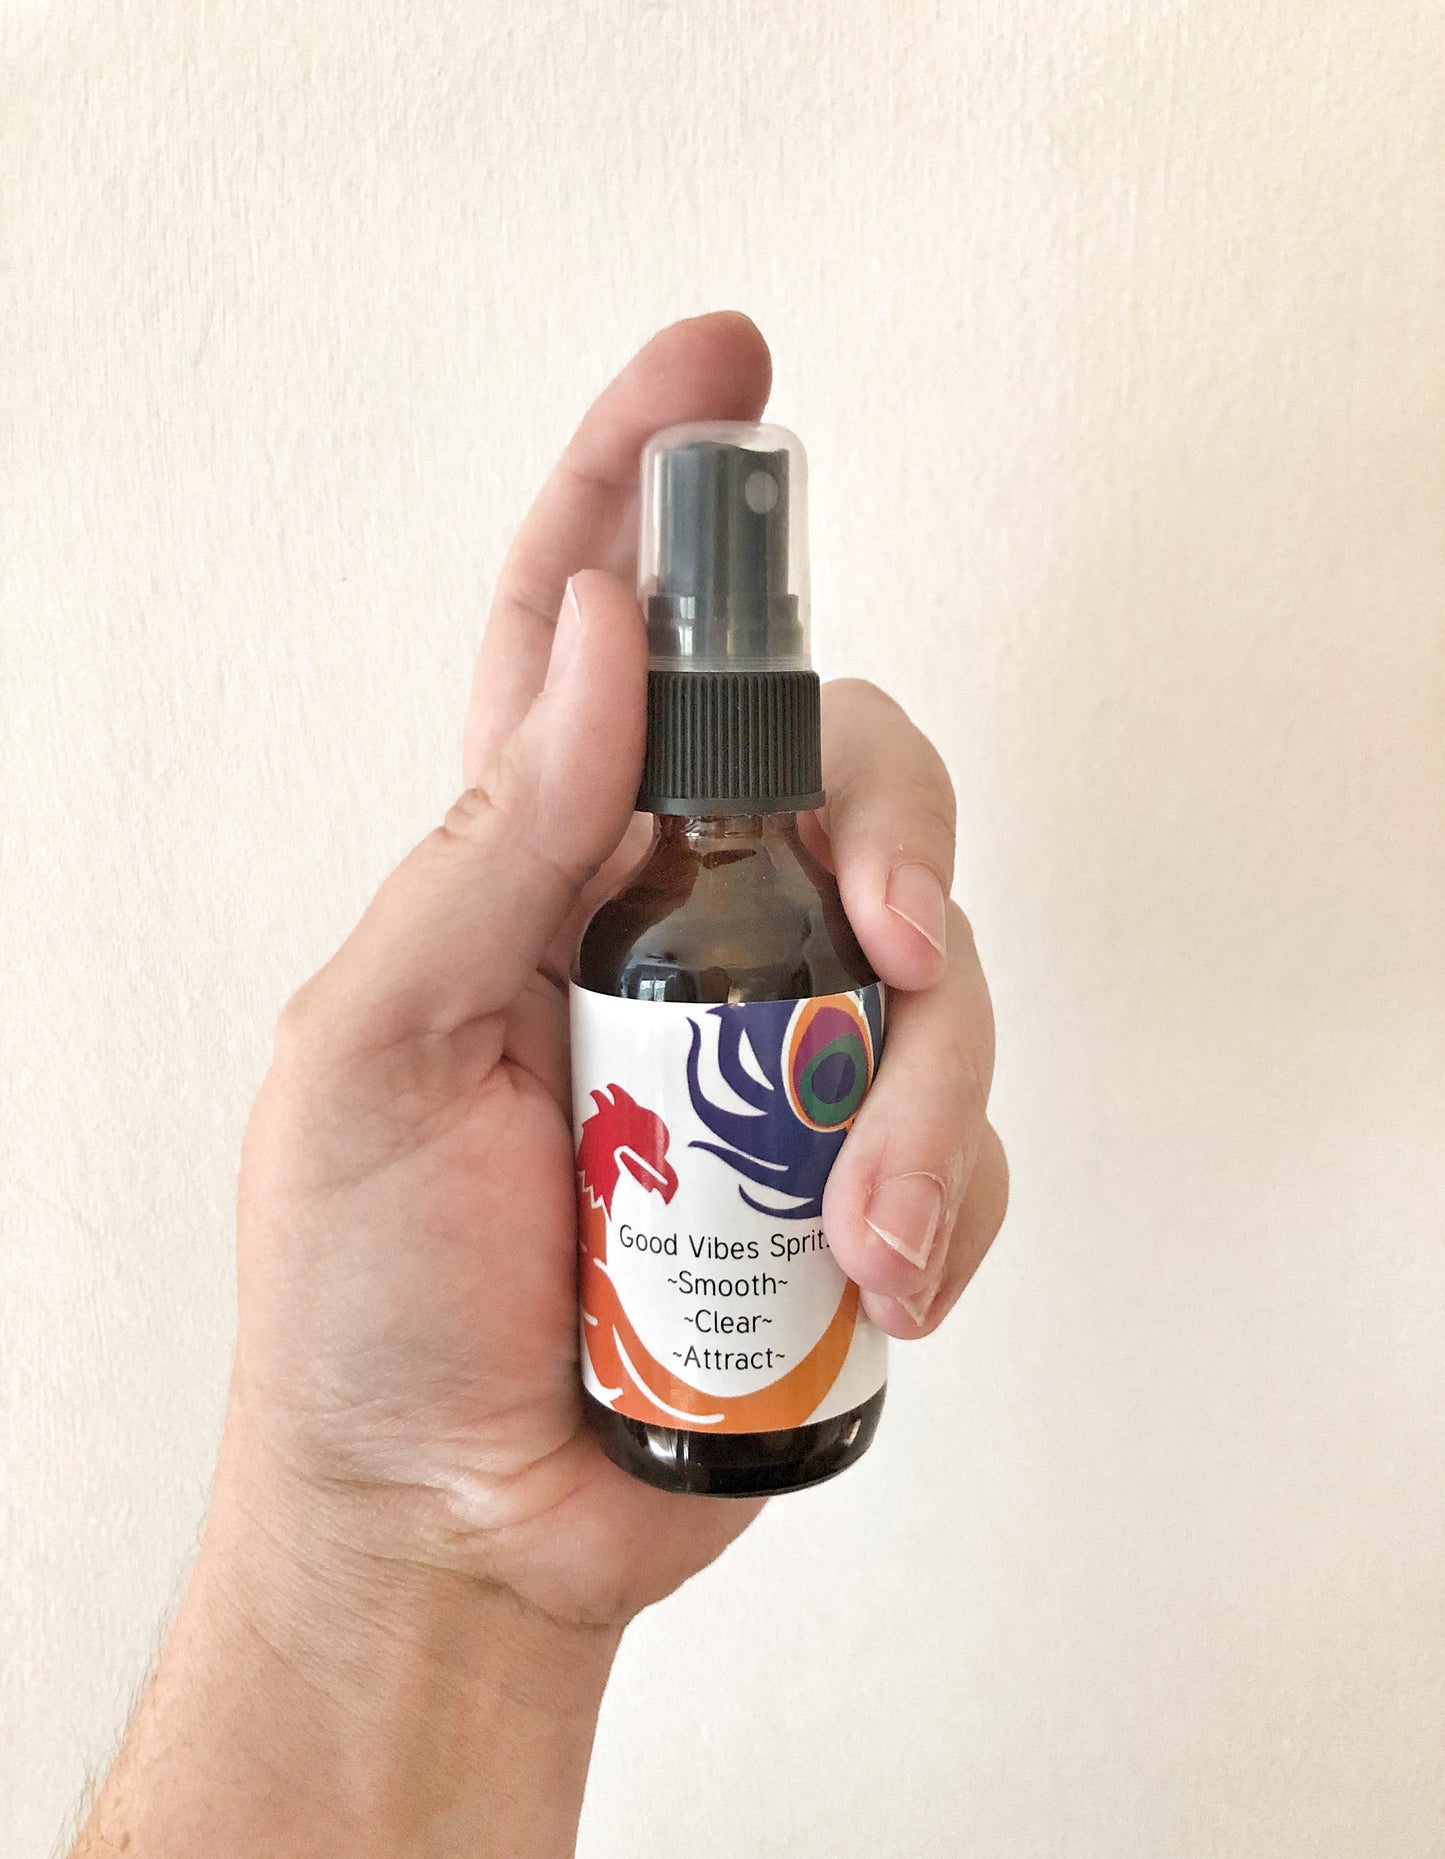 Good Vibes Spritz© / Crystal Infused Smudge Spray / Palo Santo Spray / Cleansing and Clearing Energy